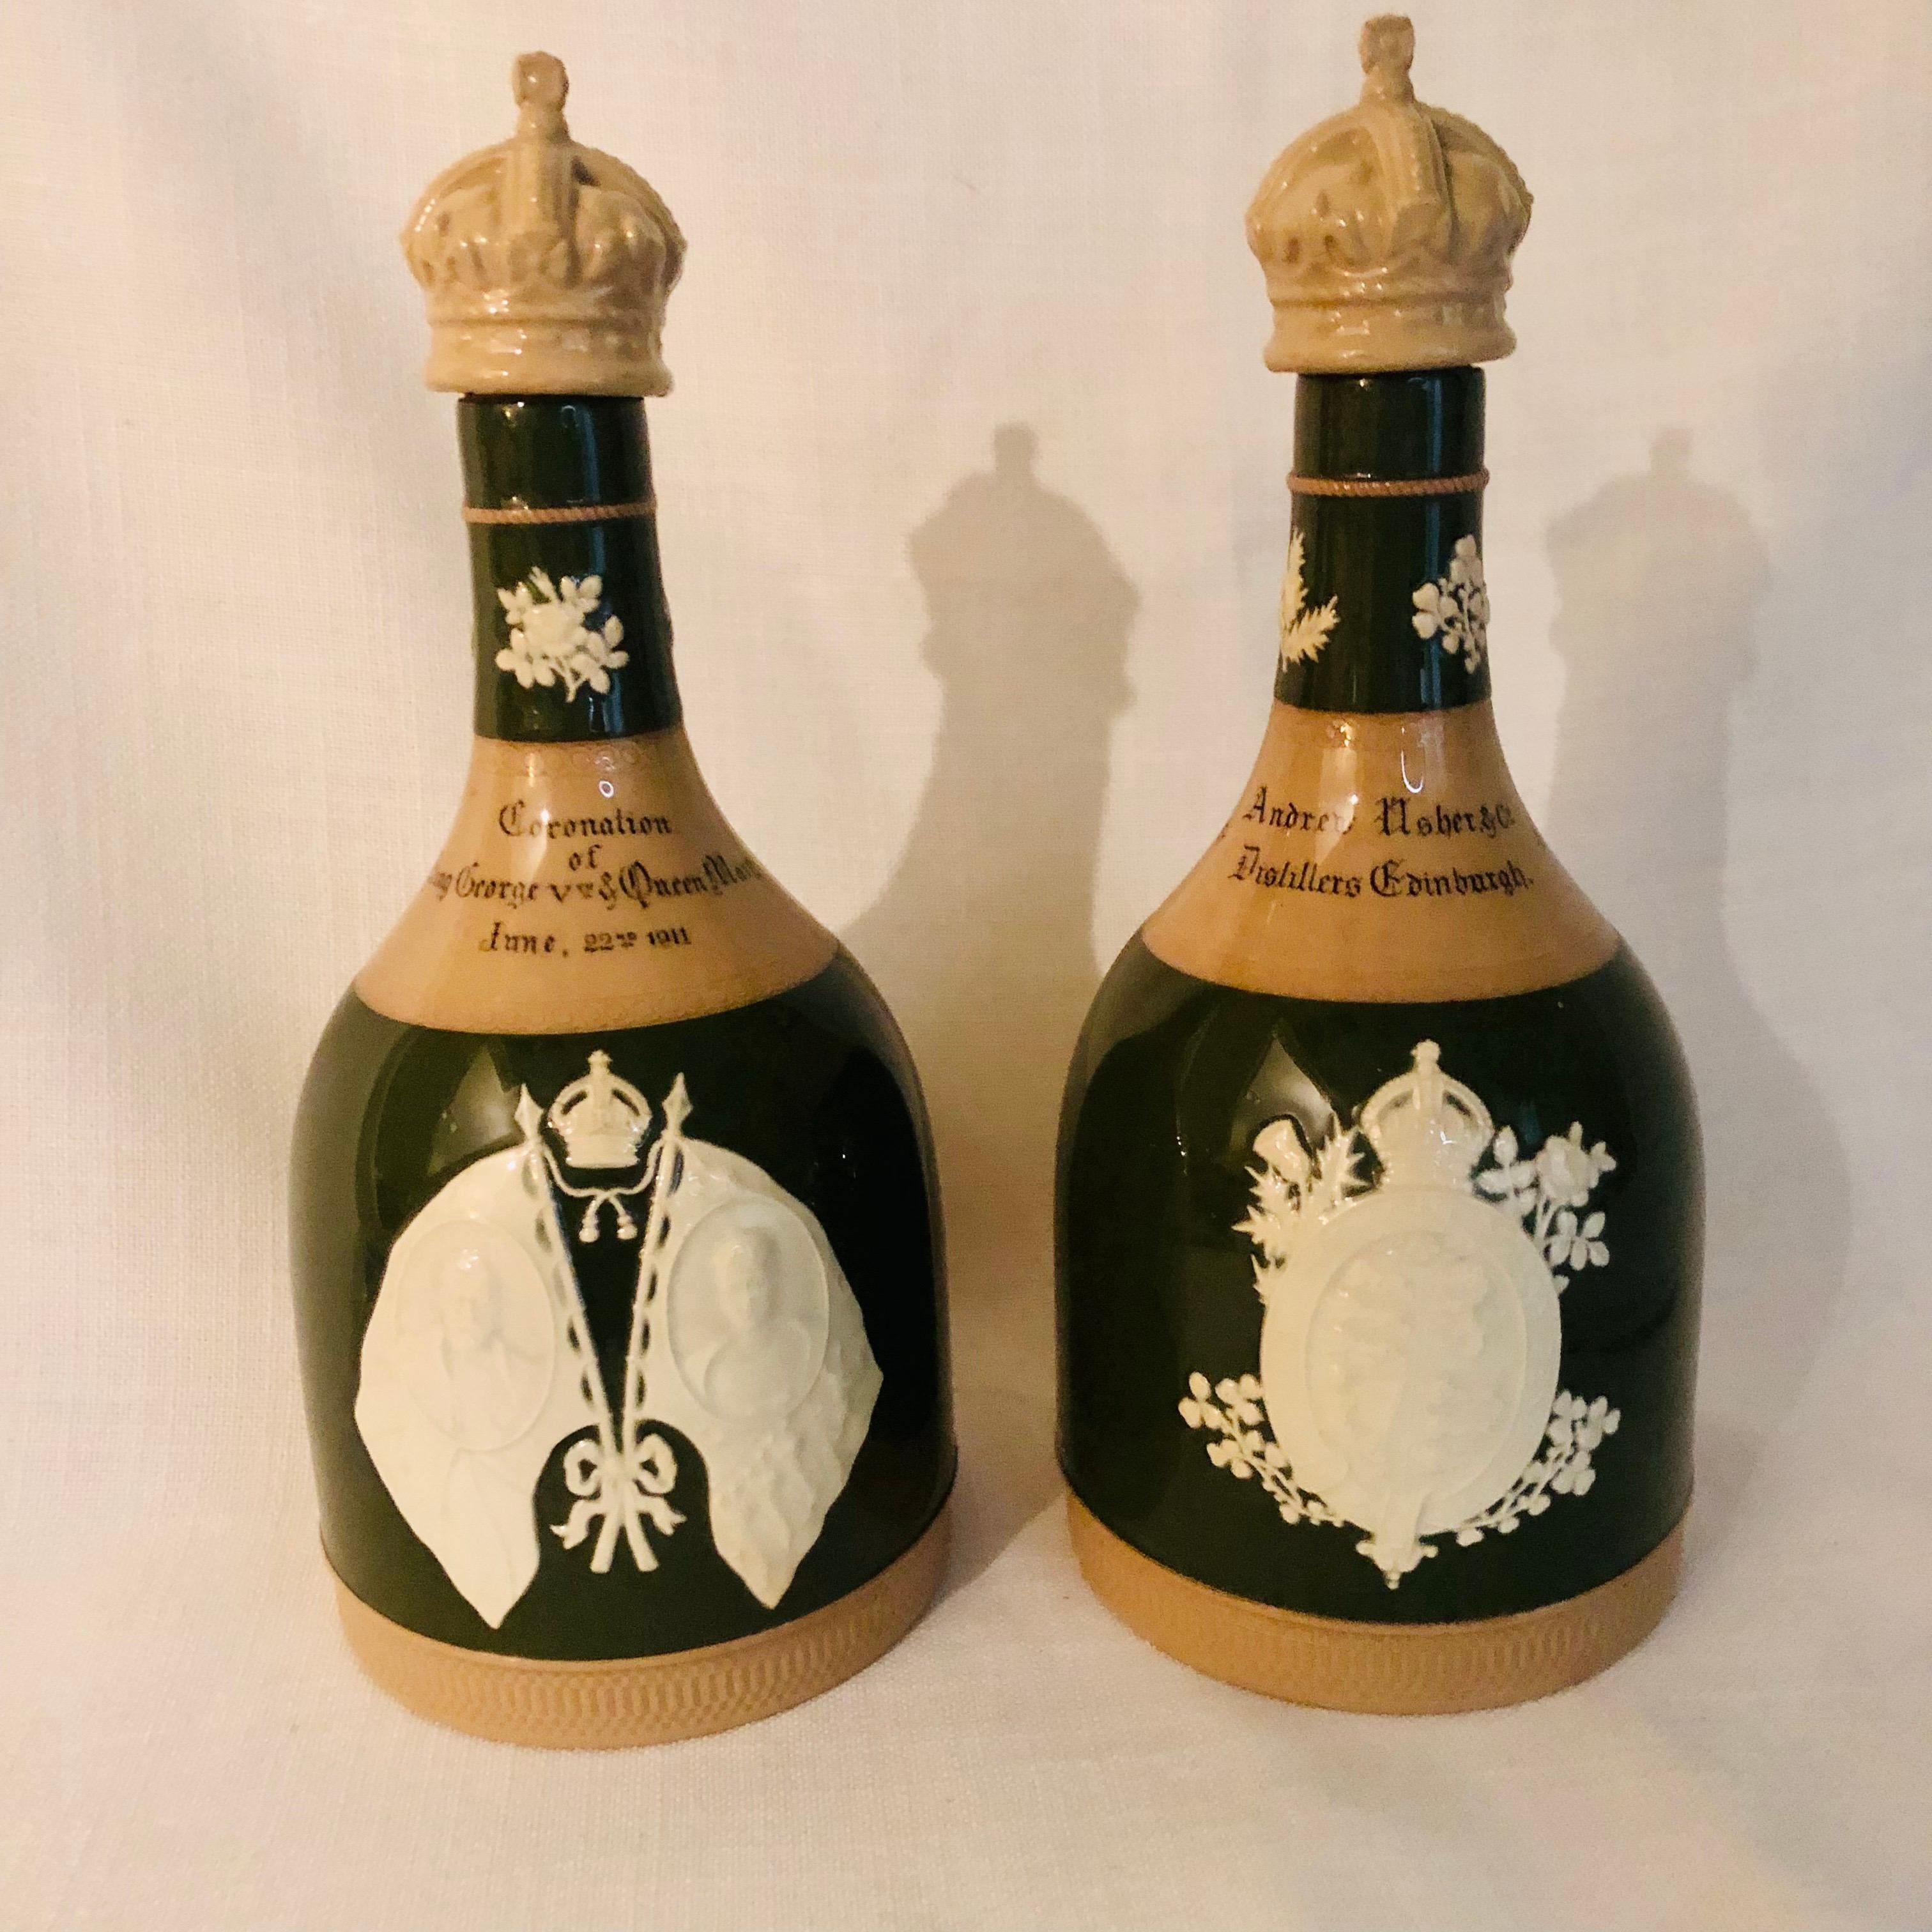 This is a wonderful rare pair of Copeland Spode decanters commemorating the coronation of Queen Mary and Prince Charles the 5th on June 22, 1911. On one side of the decanters are two medallions depicting Queen Mary and Prince Charles the 5th. The